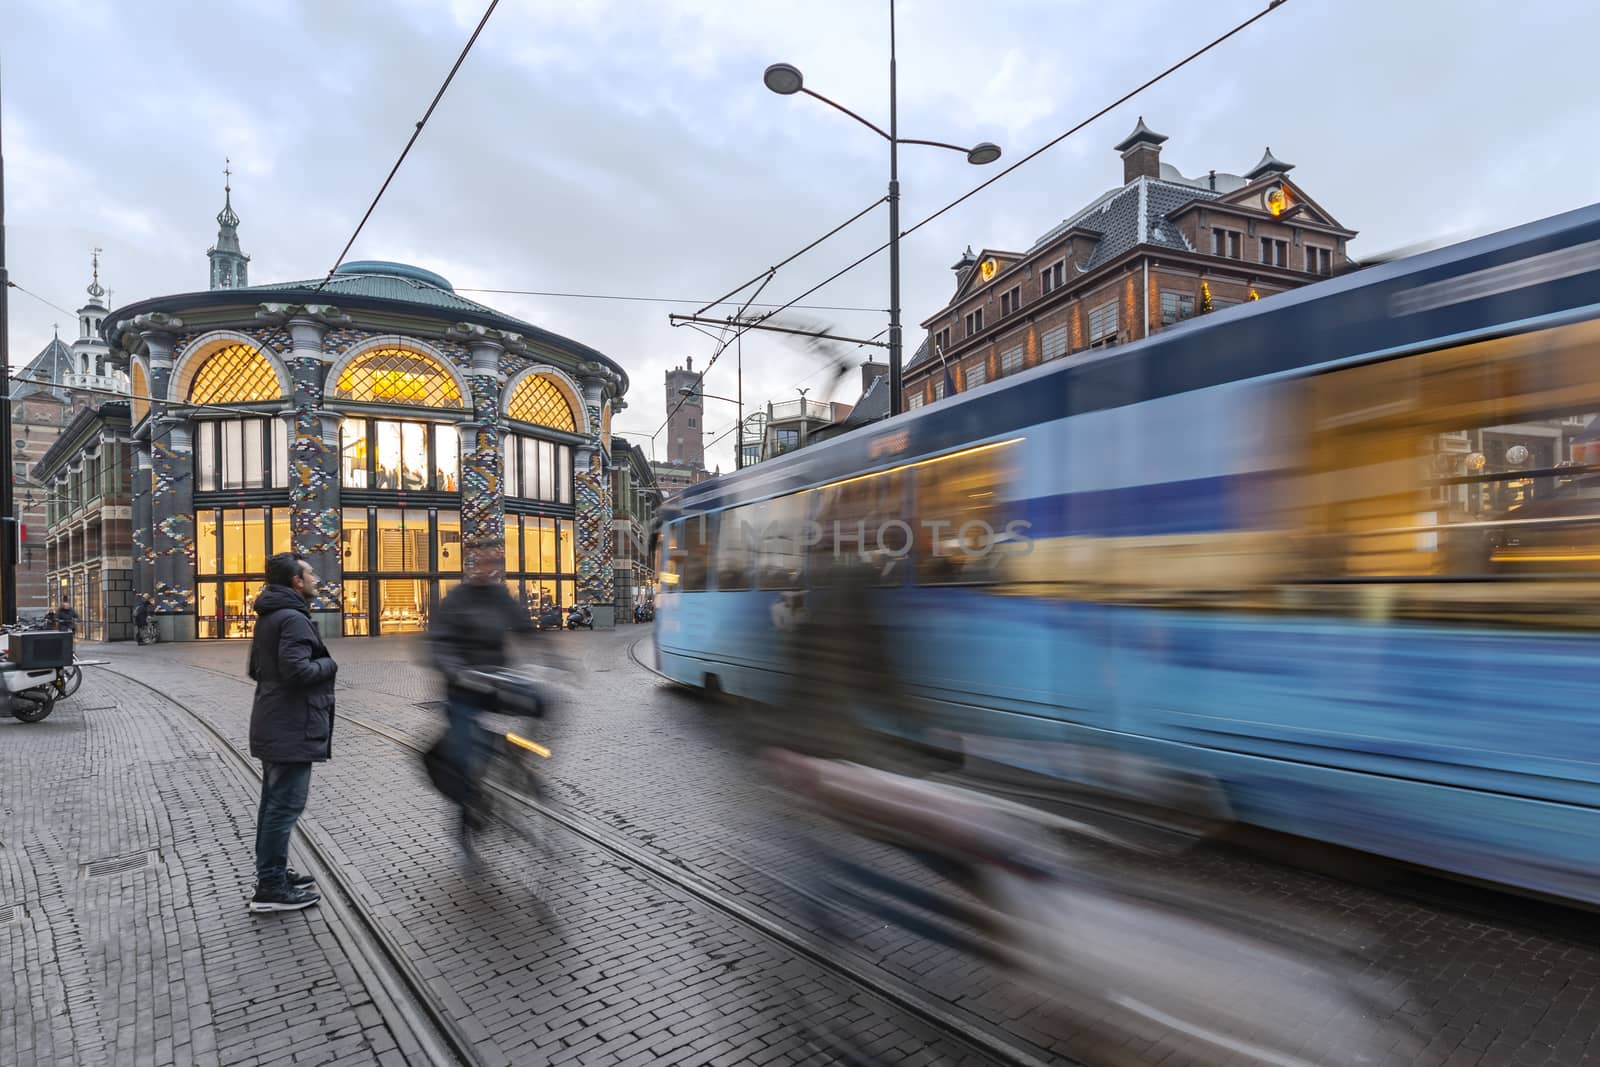 Fast tram and cyclist in The Hague, Netherlands by ankorlight